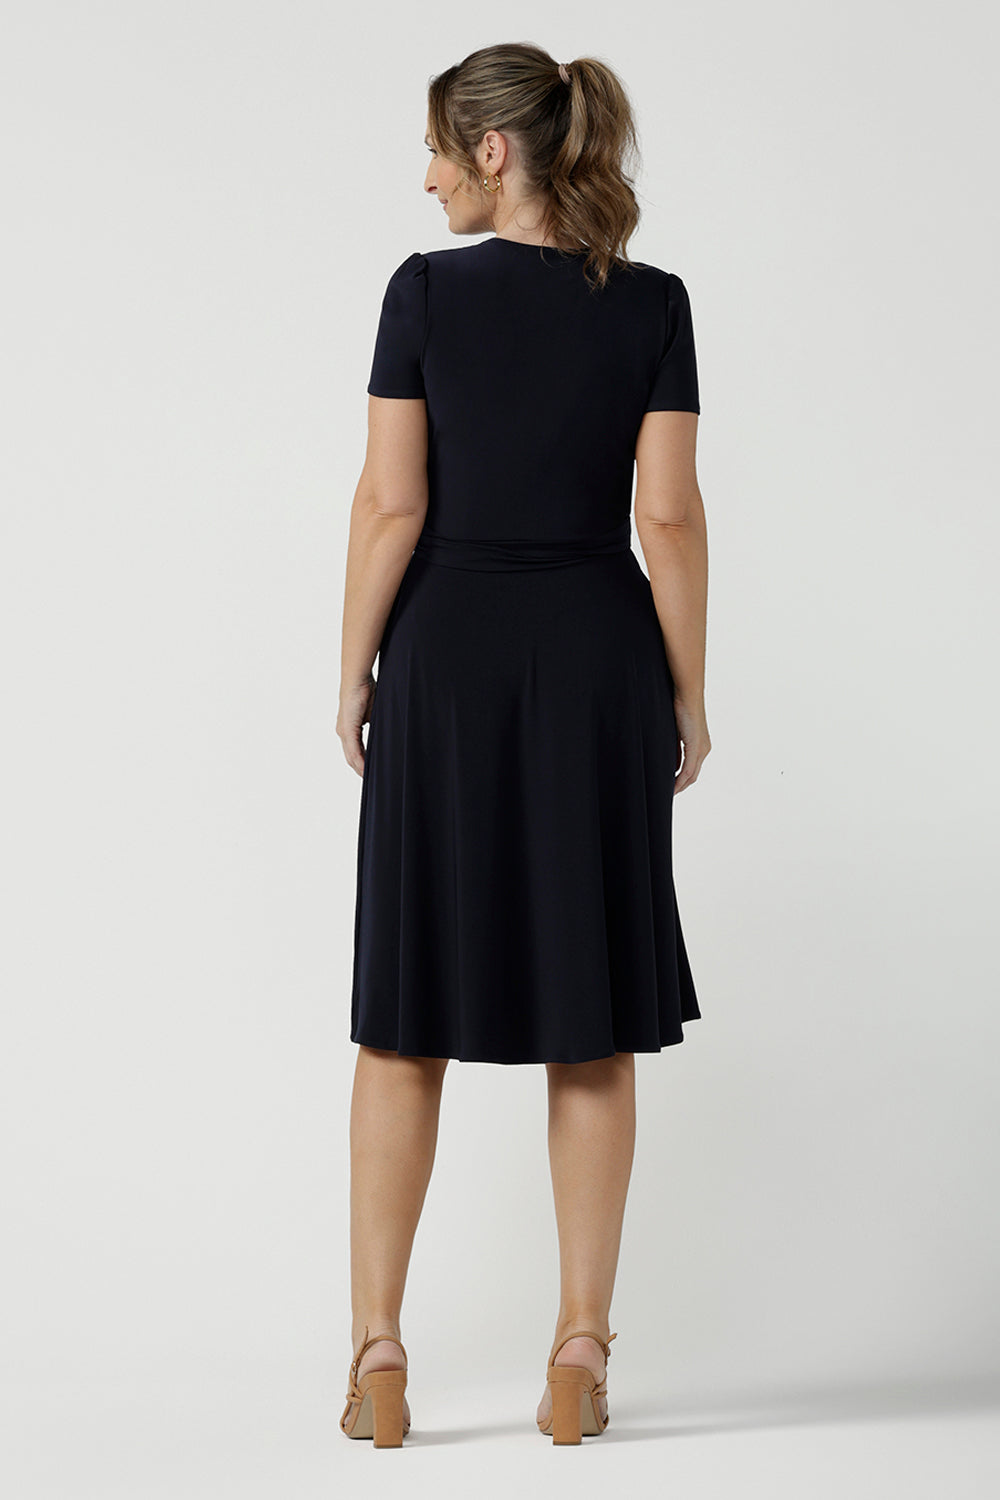 Back view of an over 40, size 10 woman wearing a navy, wrap dress with short sleeves. A great dress for summer casual wear, or for travel. Shop made in Australia dresses in petite to plus sizes online at Australian fashion brand, Leina & Fleur.